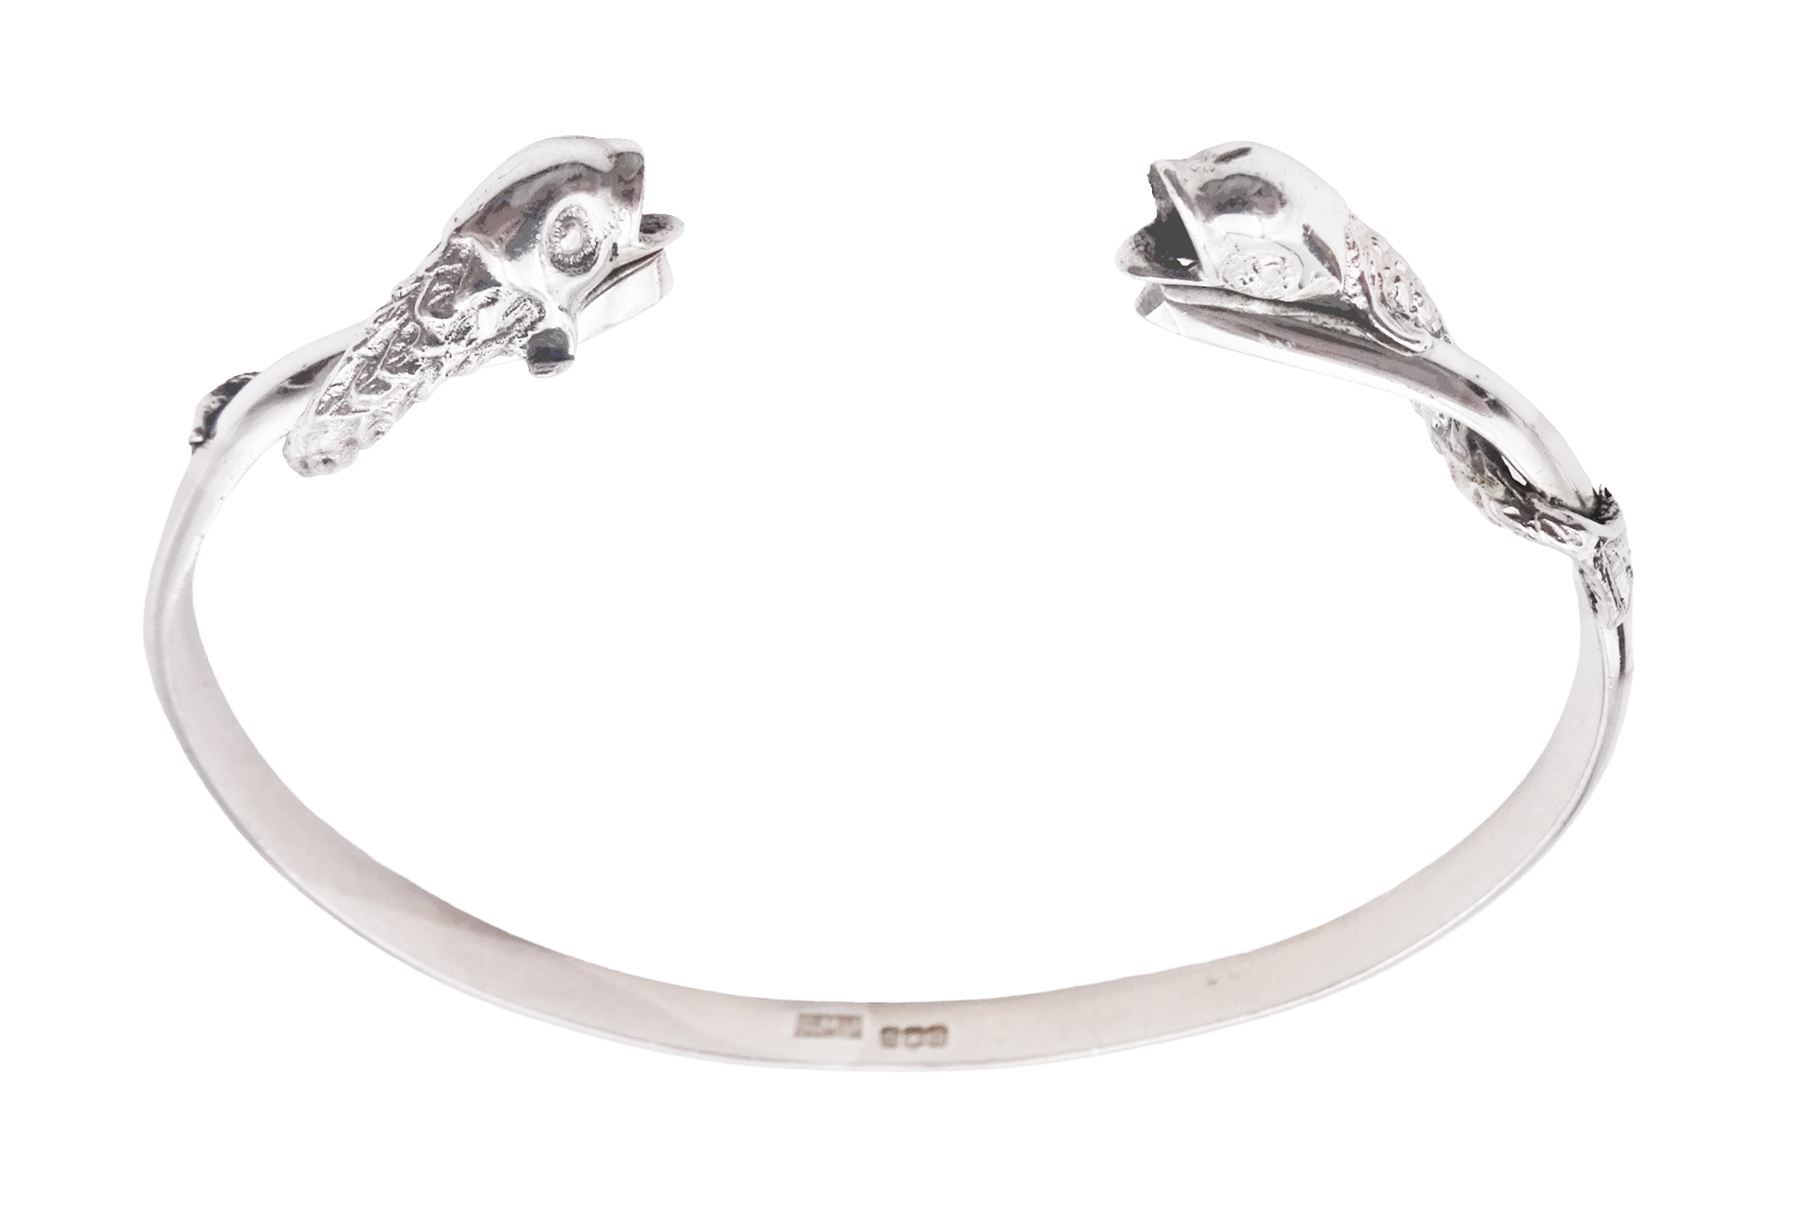 Scottish silver koi carp torque bangle by Scotia Manufacturing Jewellers Limited